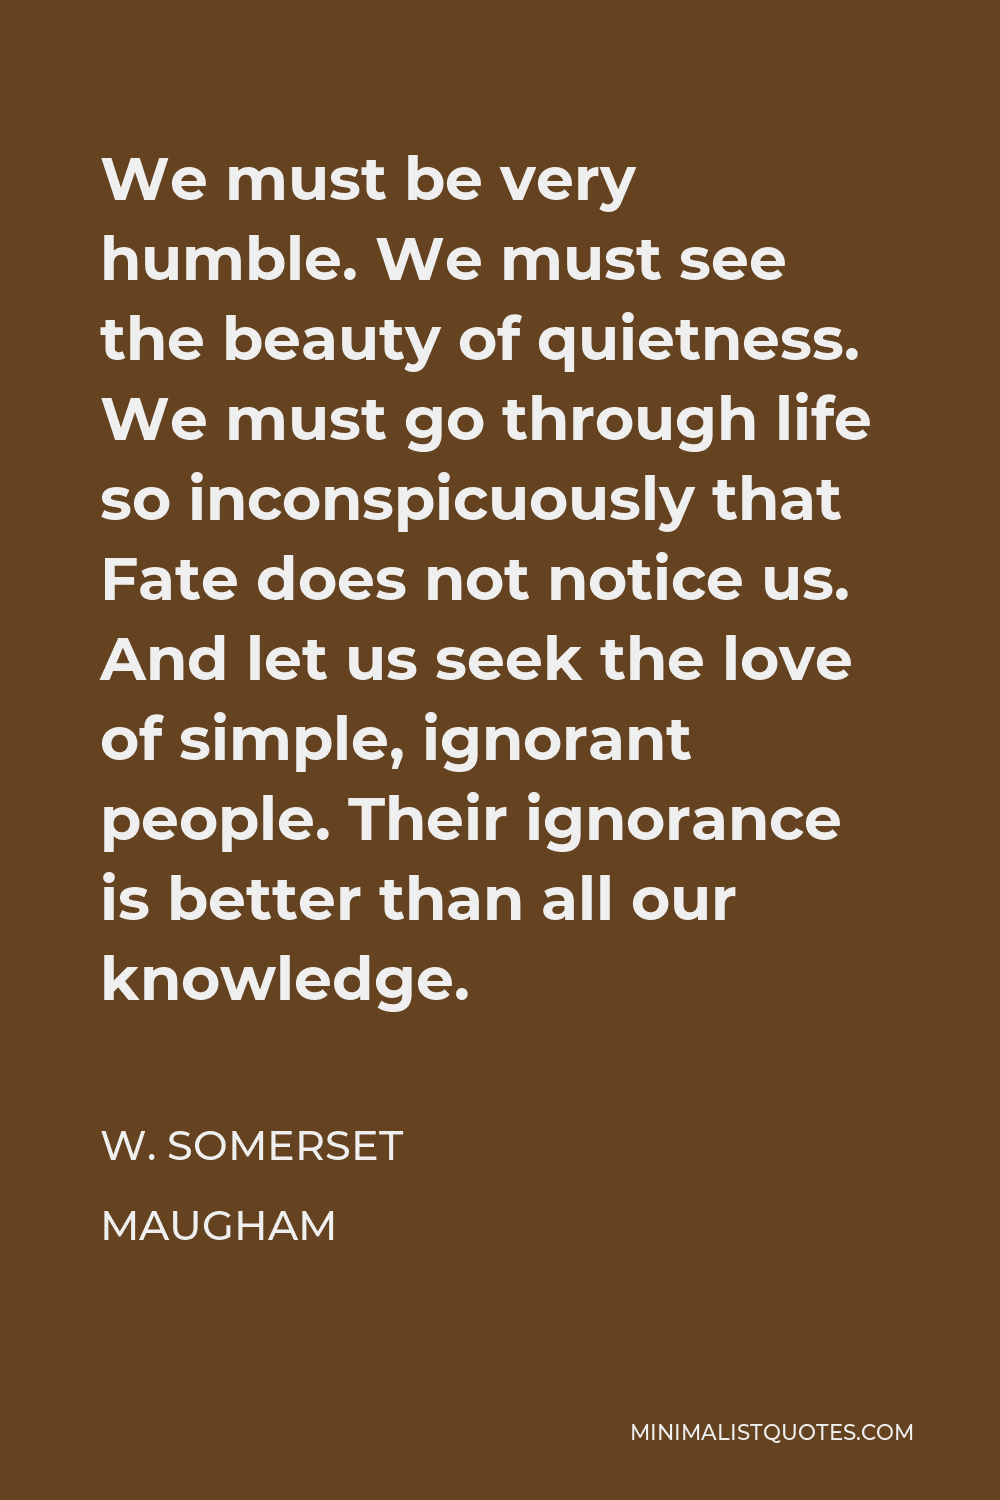 W. Somerset Maugham Quote - We must be very humble. We must see the beauty of quietness. We must go through life so inconspicuously that Fate does not notice us. And let us seek the love of simple, ignorant people. Their ignorance is better than all our knowledge.